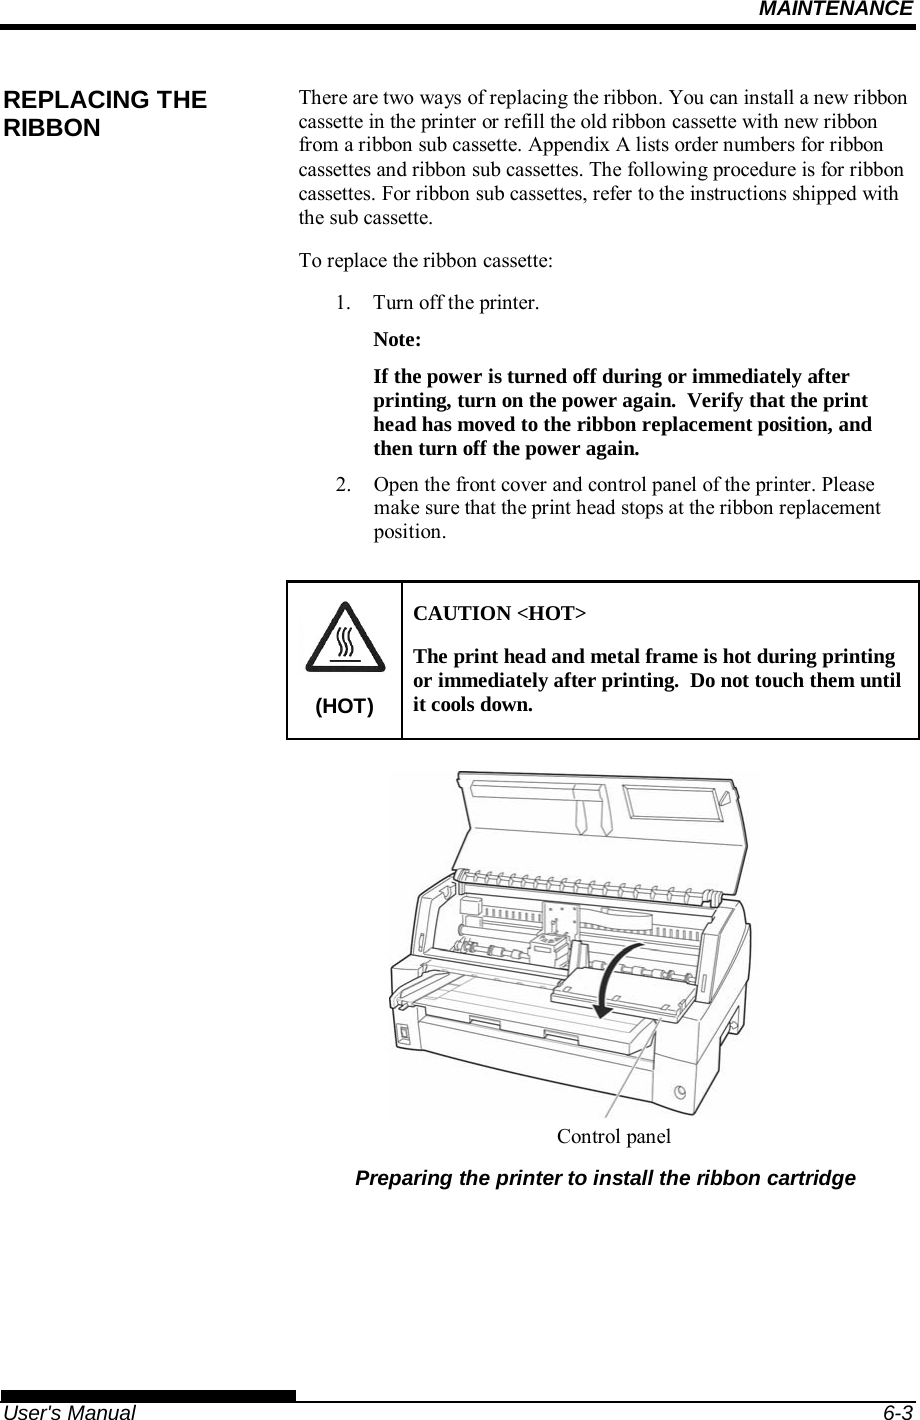 MAINTENANCE   User&apos;s Manual  6-3 There are two ways of replacing the ribbon. You can install a new ribbon cassette in the printer or refill the old ribbon cassette with new ribbon from a ribbon sub cassette. Appendix A lists order numbers for ribbon cassettes and ribbon sub cassettes. The following procedure is for ribbon cassettes. For ribbon sub cassettes, refer to the instructions shipped with the sub cassette. To replace the ribbon cassette: 1.  Turn off the printer. Note: If the power is turned off during or immediately after printing, turn on the power again.  Verify that the print head has moved to the ribbon replacement position, and then turn off the power again. 2.  Open the front cover and control panel of the printer. Please make sure that the print head stops at the ribbon replacement position.  (HOT) CAUTION &lt;HOT&gt; The print head and metal frame is hot during printing or immediately after printing.  Do not touch them until it cools down.           Preparing the printer to install the ribbon cartridge REPLACING THE RIBBON Controlpanel